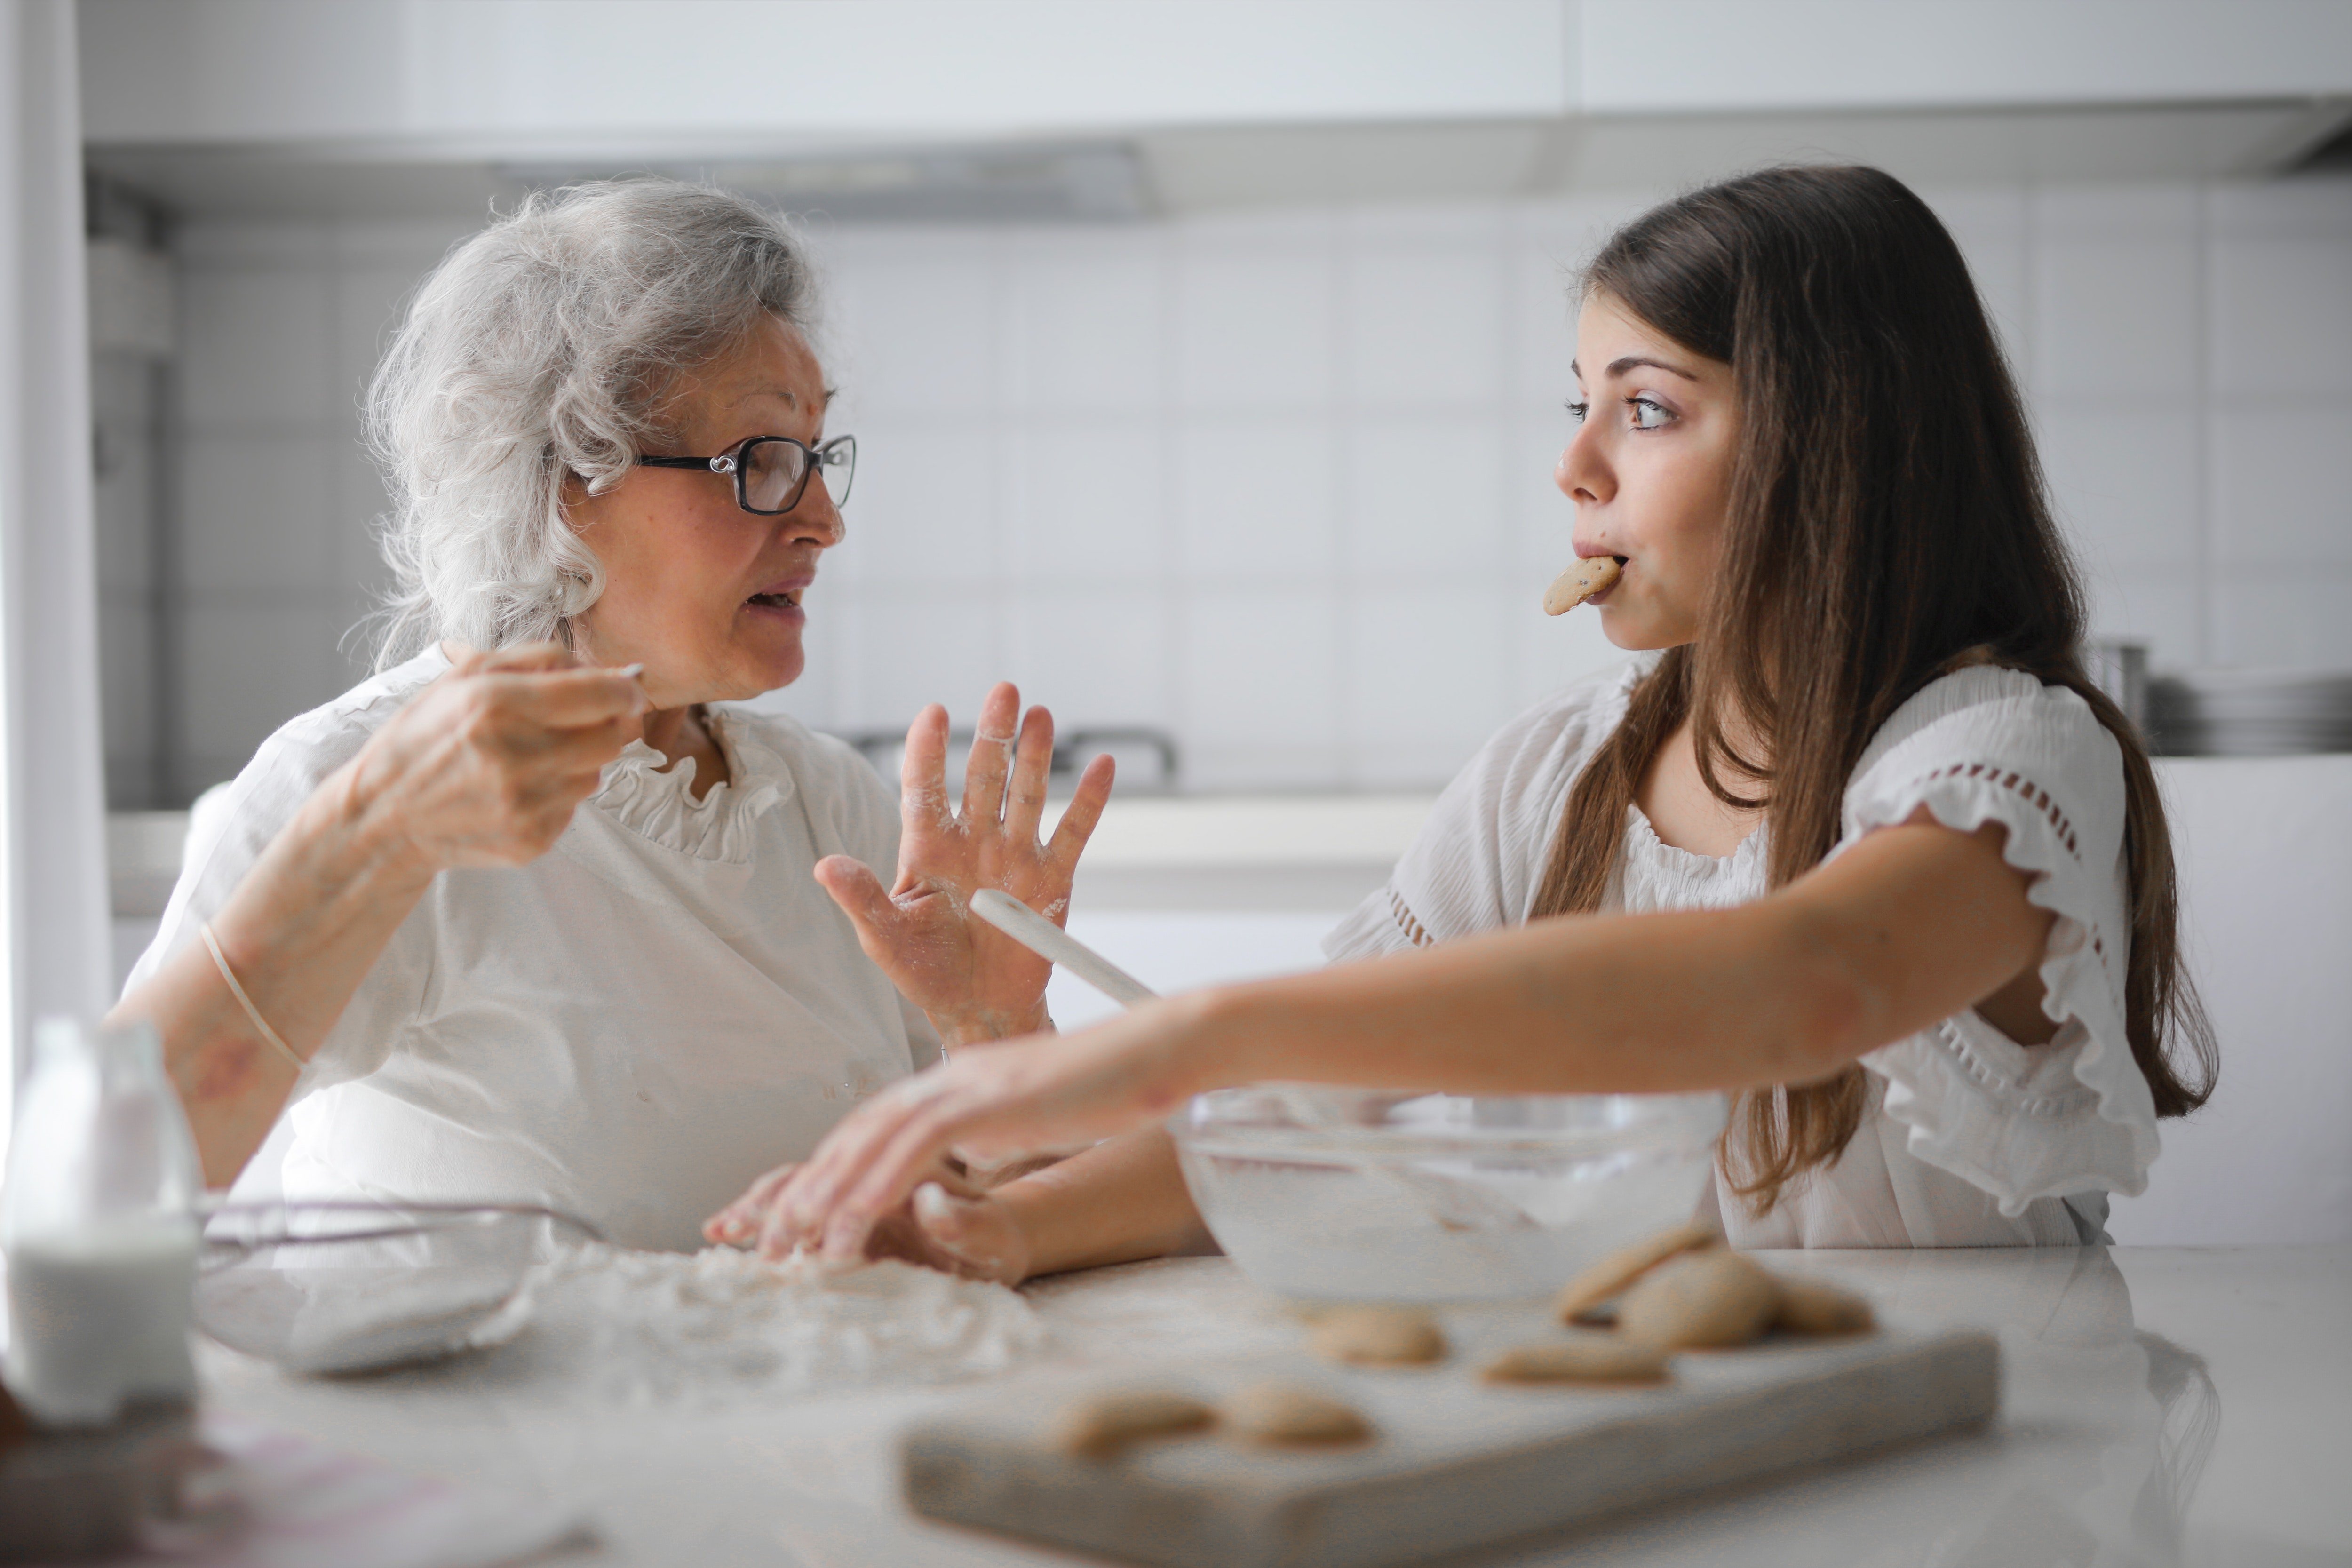 An elderly lady is seen having a conversation with a young girl in the kitchen. | Source: Pexels